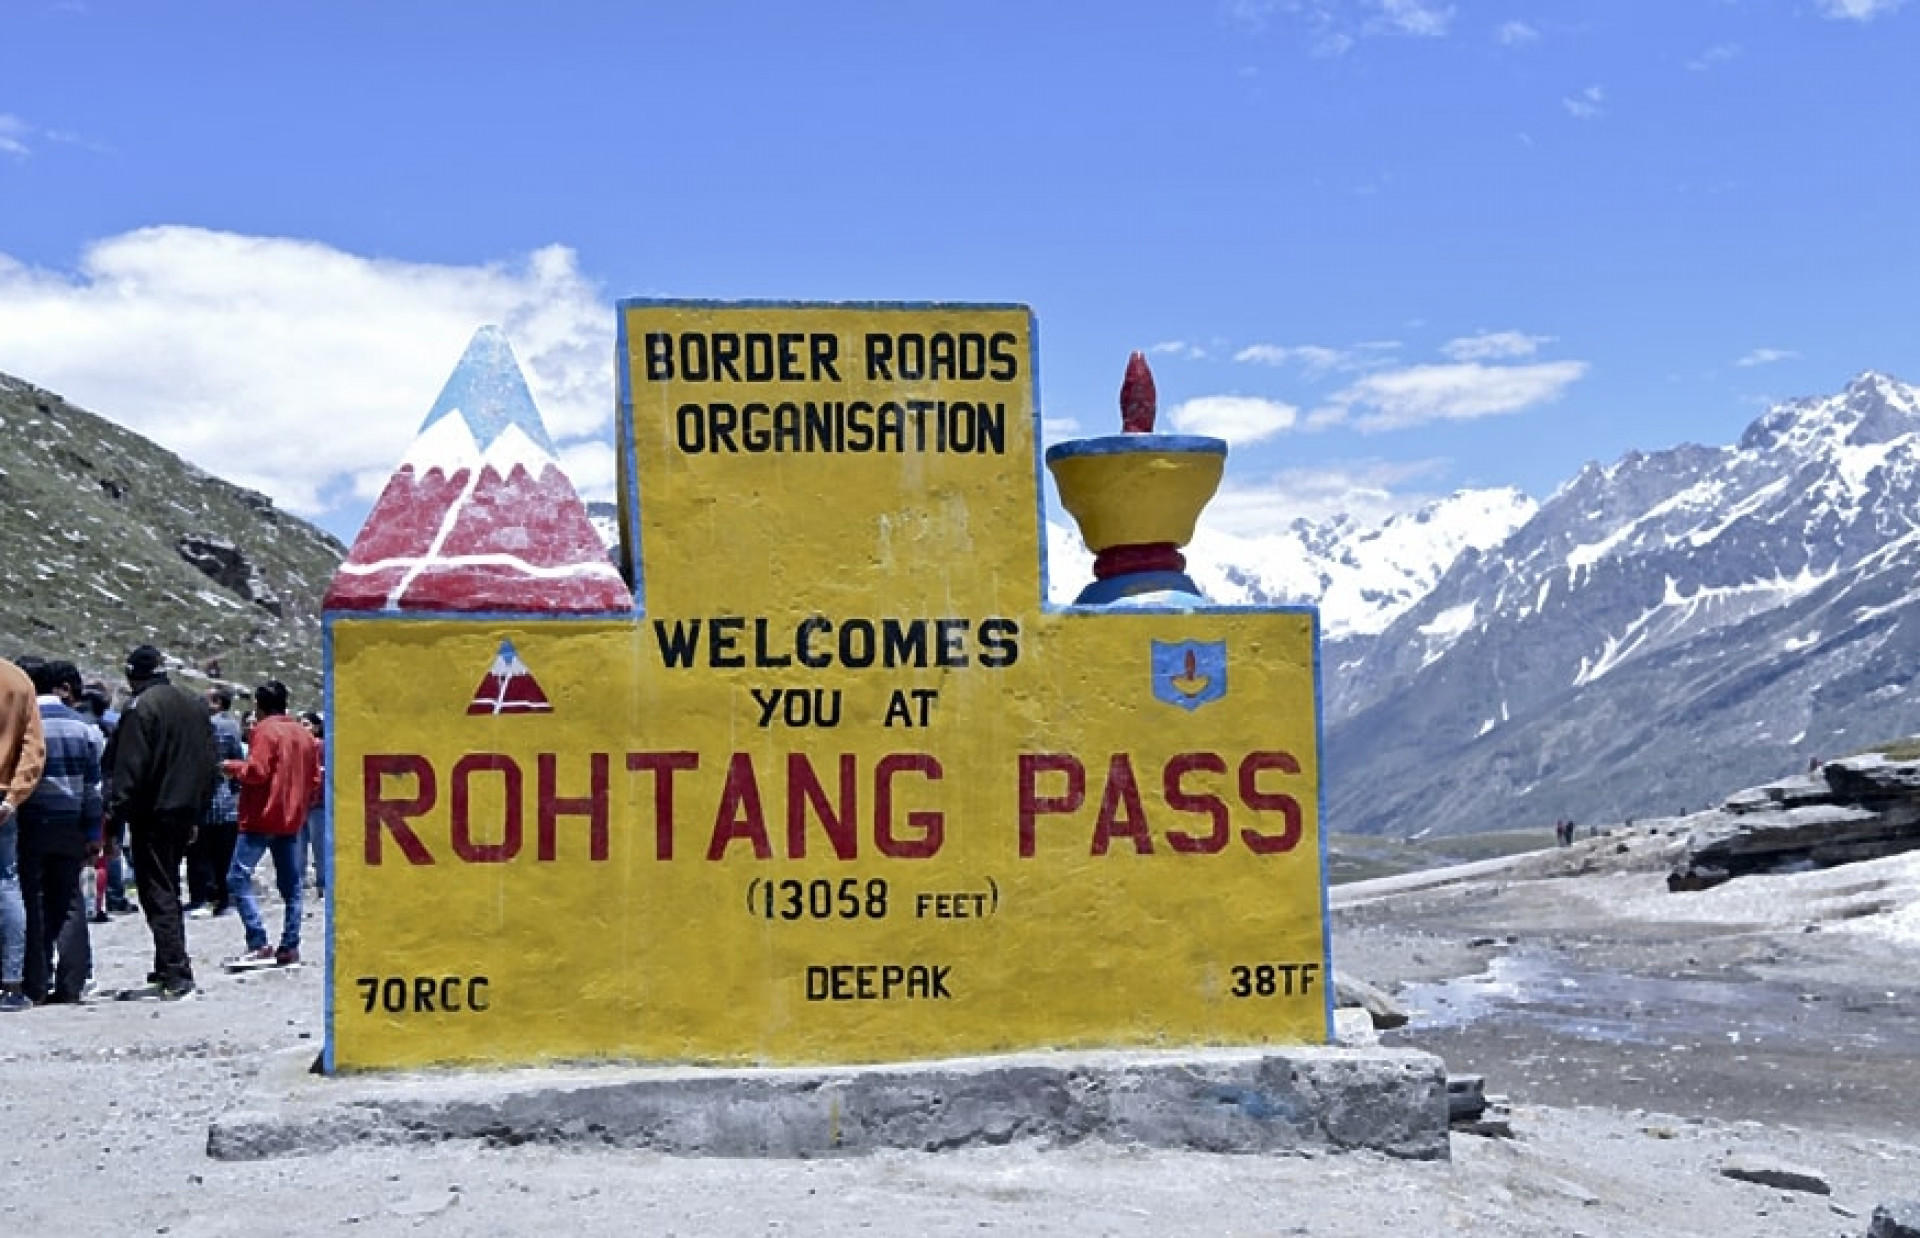 Tenth Coldest Place in India: Rohtang Pass, Manali